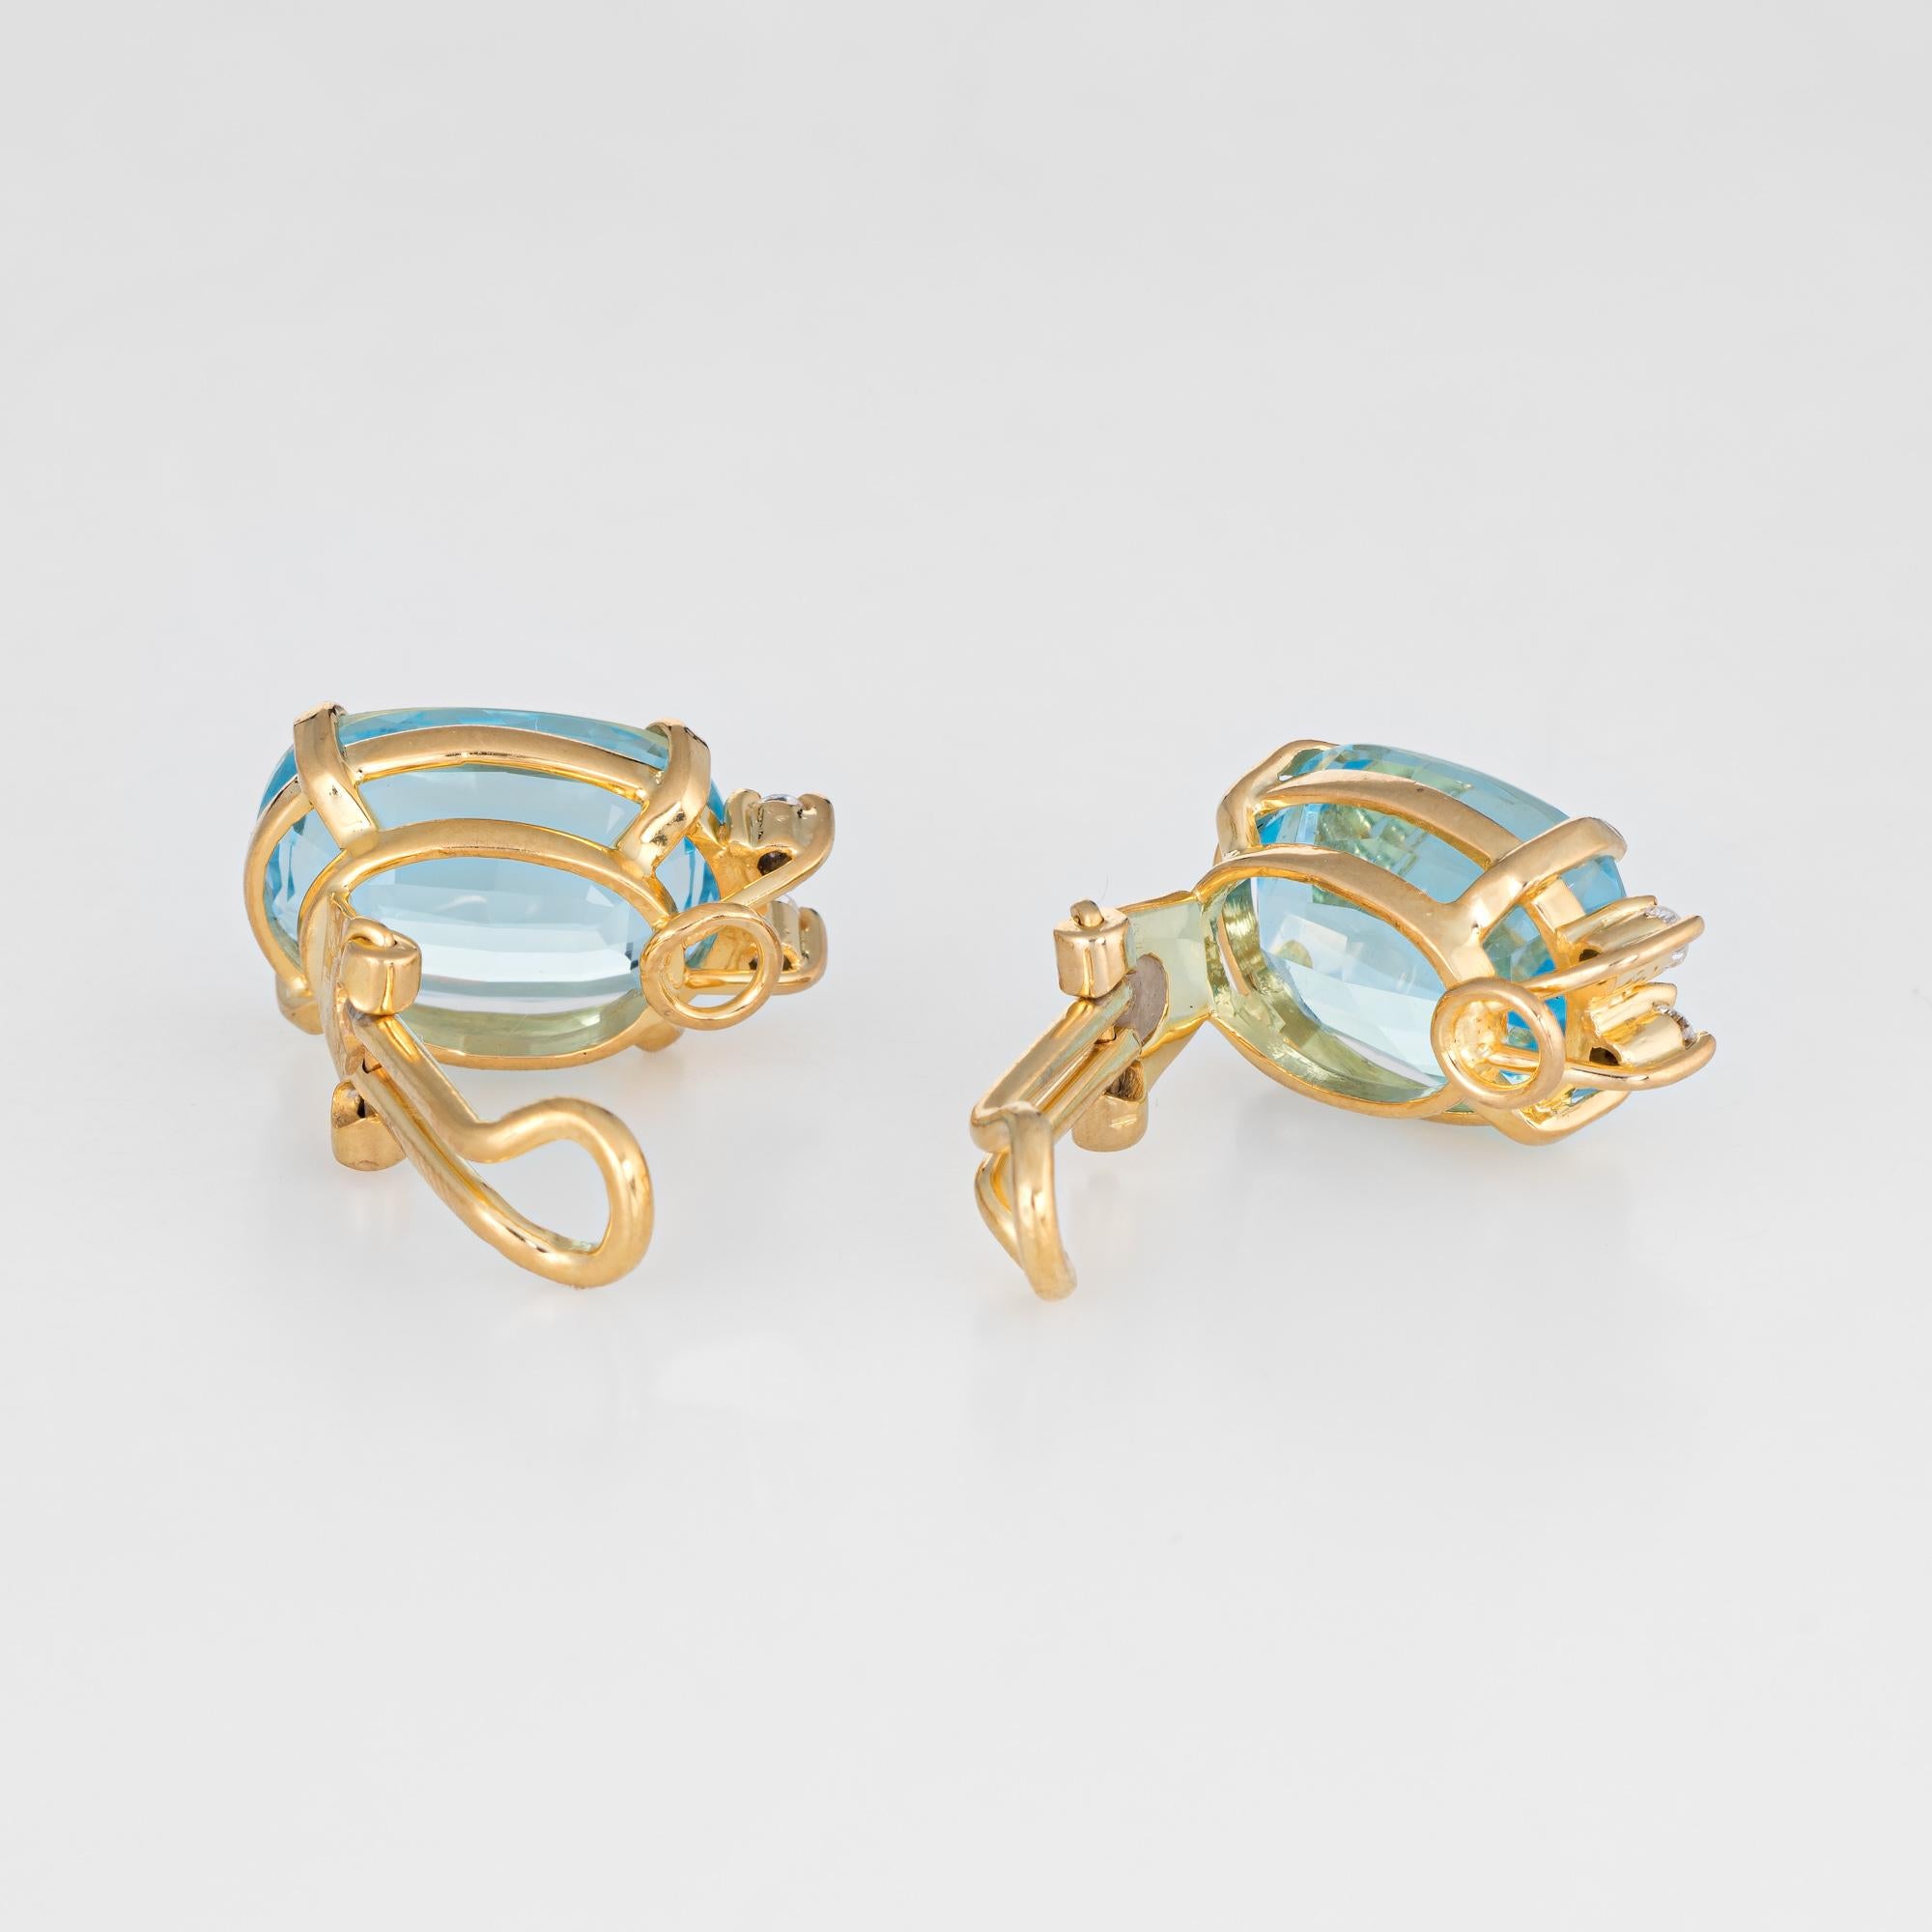 Elegant pair of blue topaz & diamond earrings crafted in 18k yellow gold. 

Oval cut faceted blue topaz measuring 13mm x 10mm (estimated at 5 carats each - 10 carats total estimated weight), accented with four estimated at 0.01 carat diamonds. The